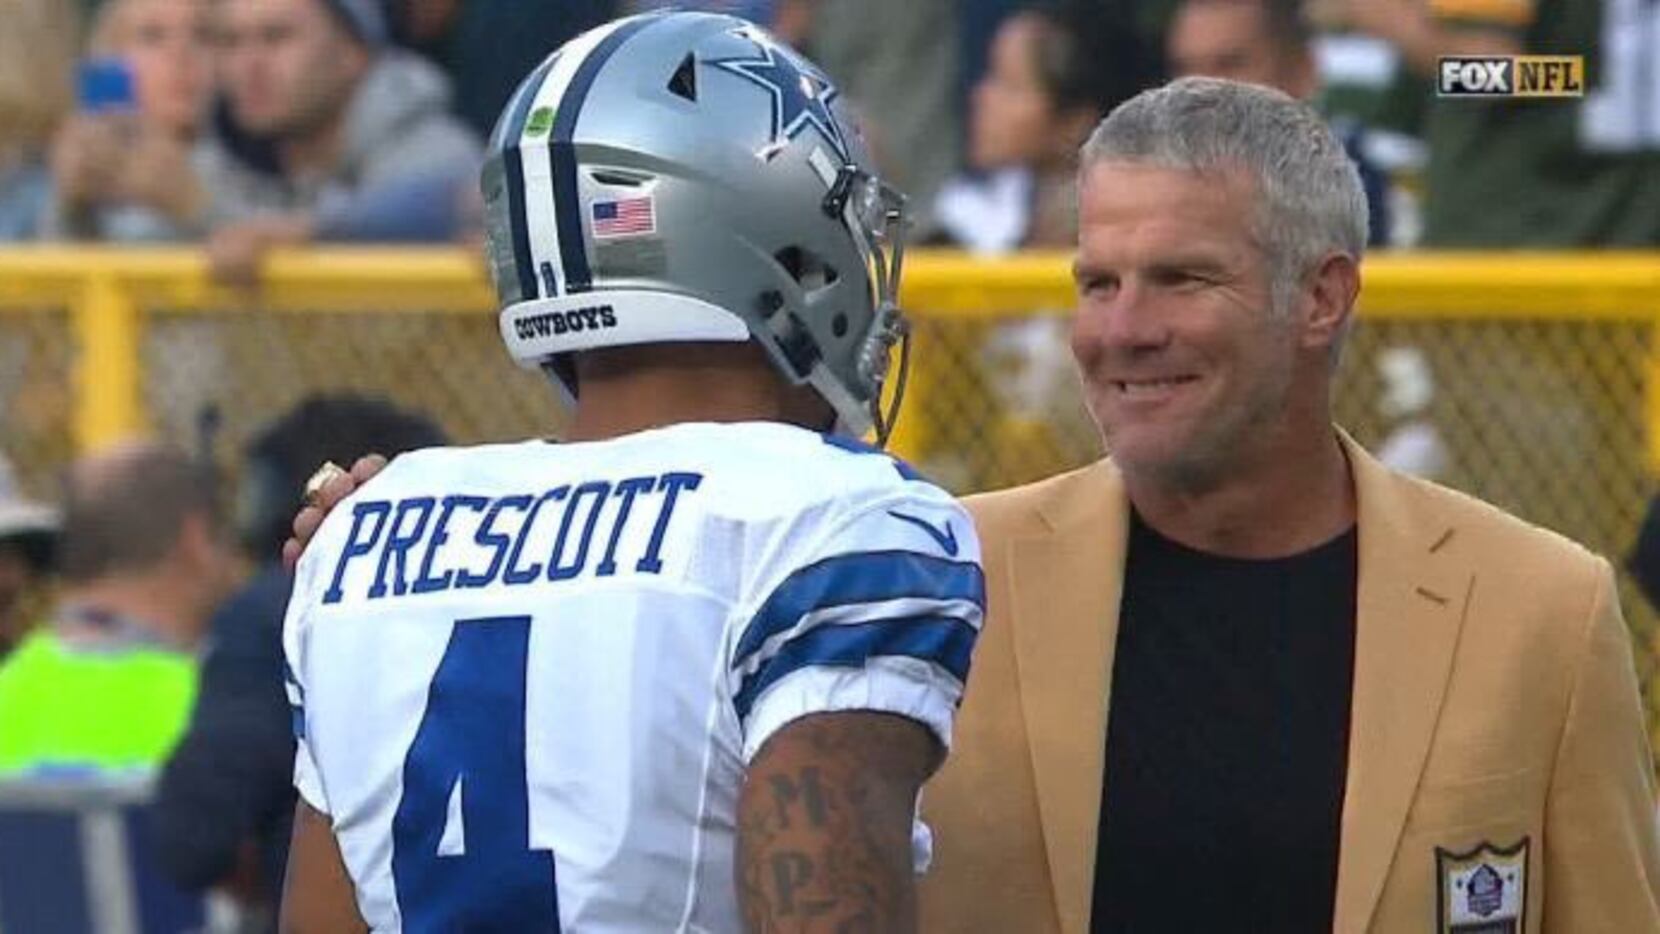 Brett Favre: I thought Green Bay would be too big for Dak, but 'the kid's  playing outstanding'